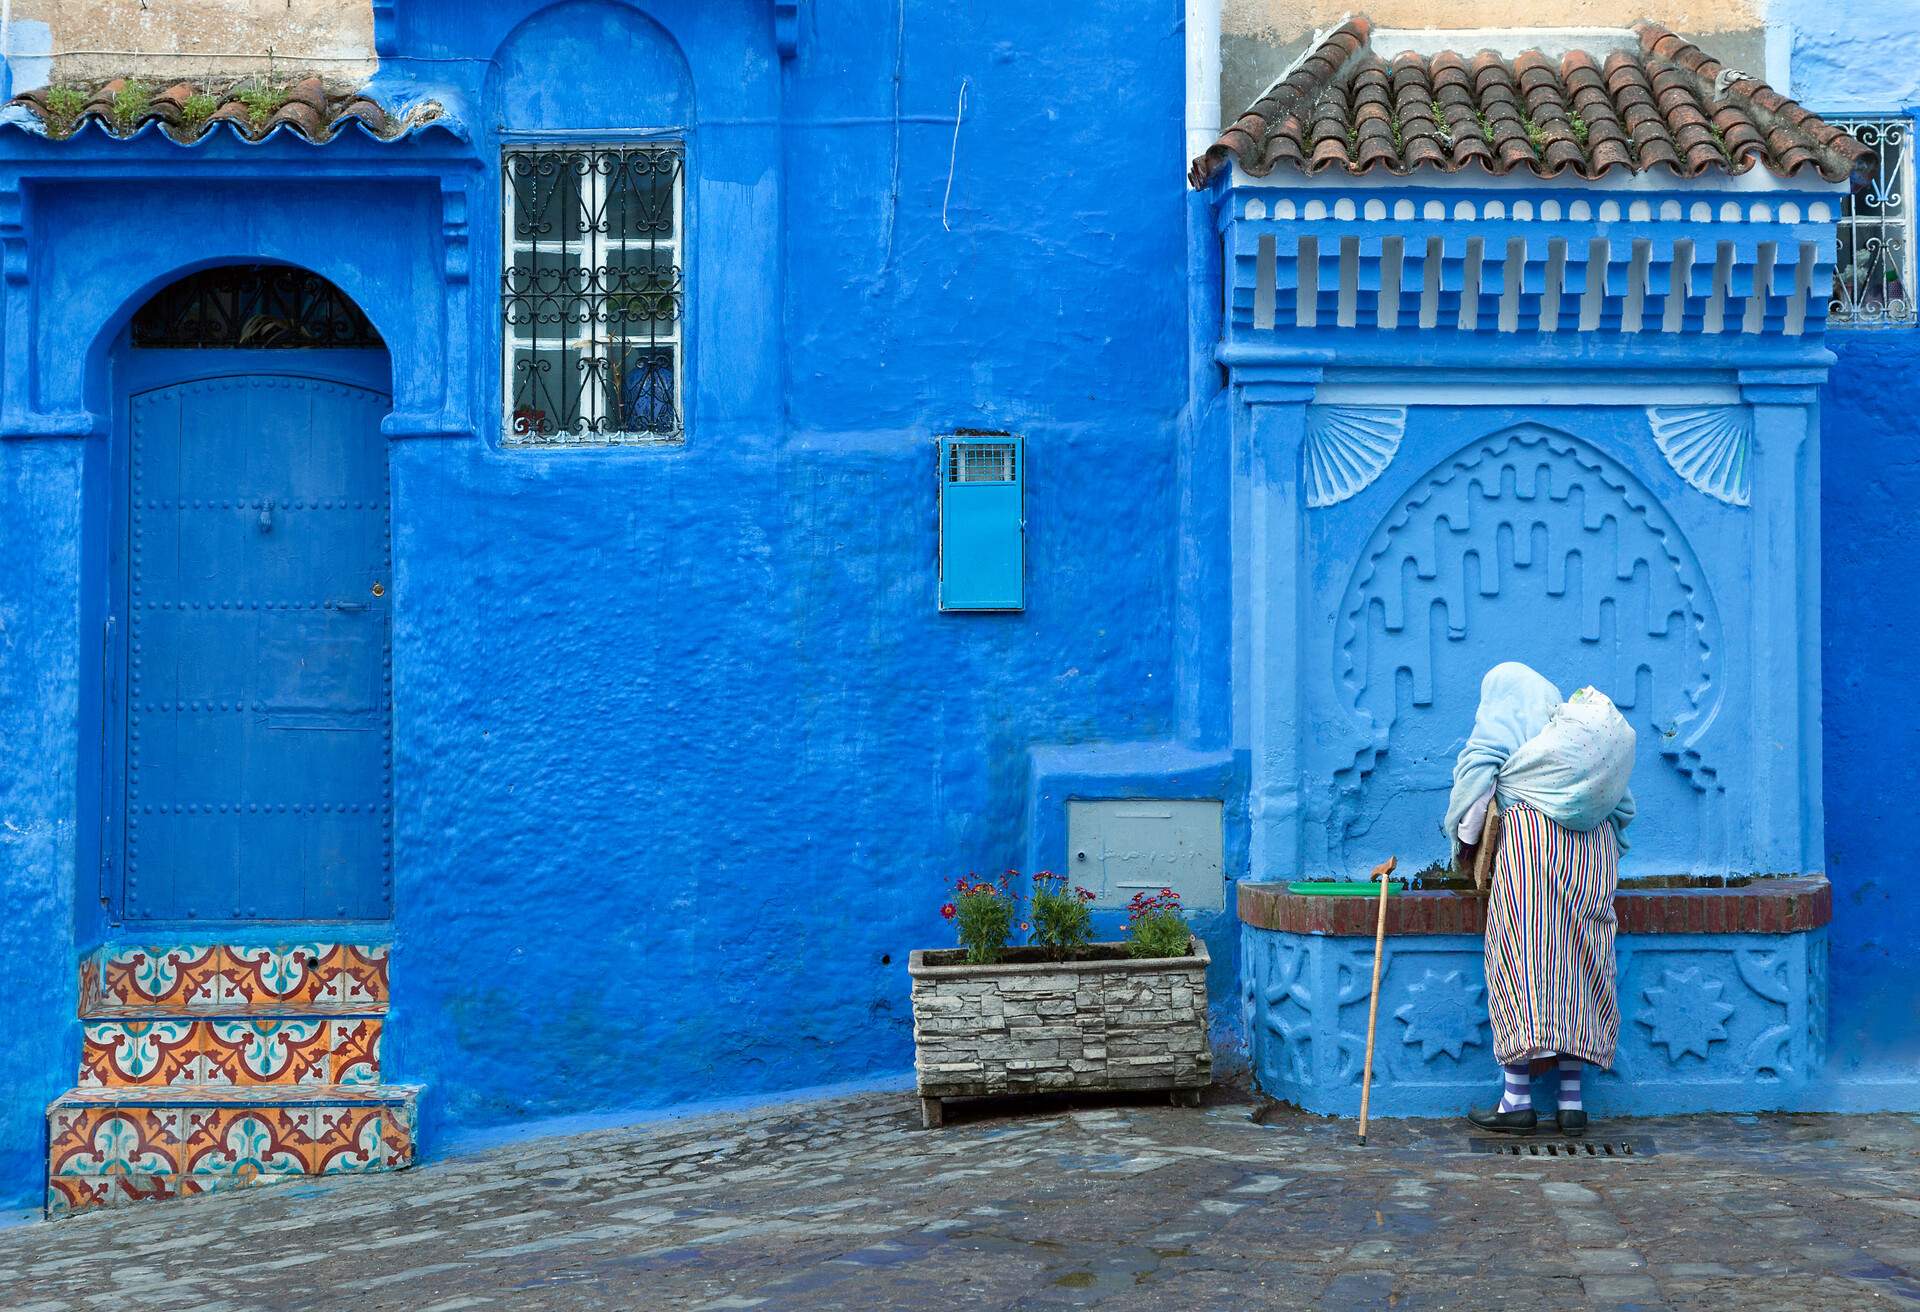 Chefchaouen or Chaouen is a city in northwestern Morocco. It is located in the Rif mountains and is noted for its buildings in shades of blue.